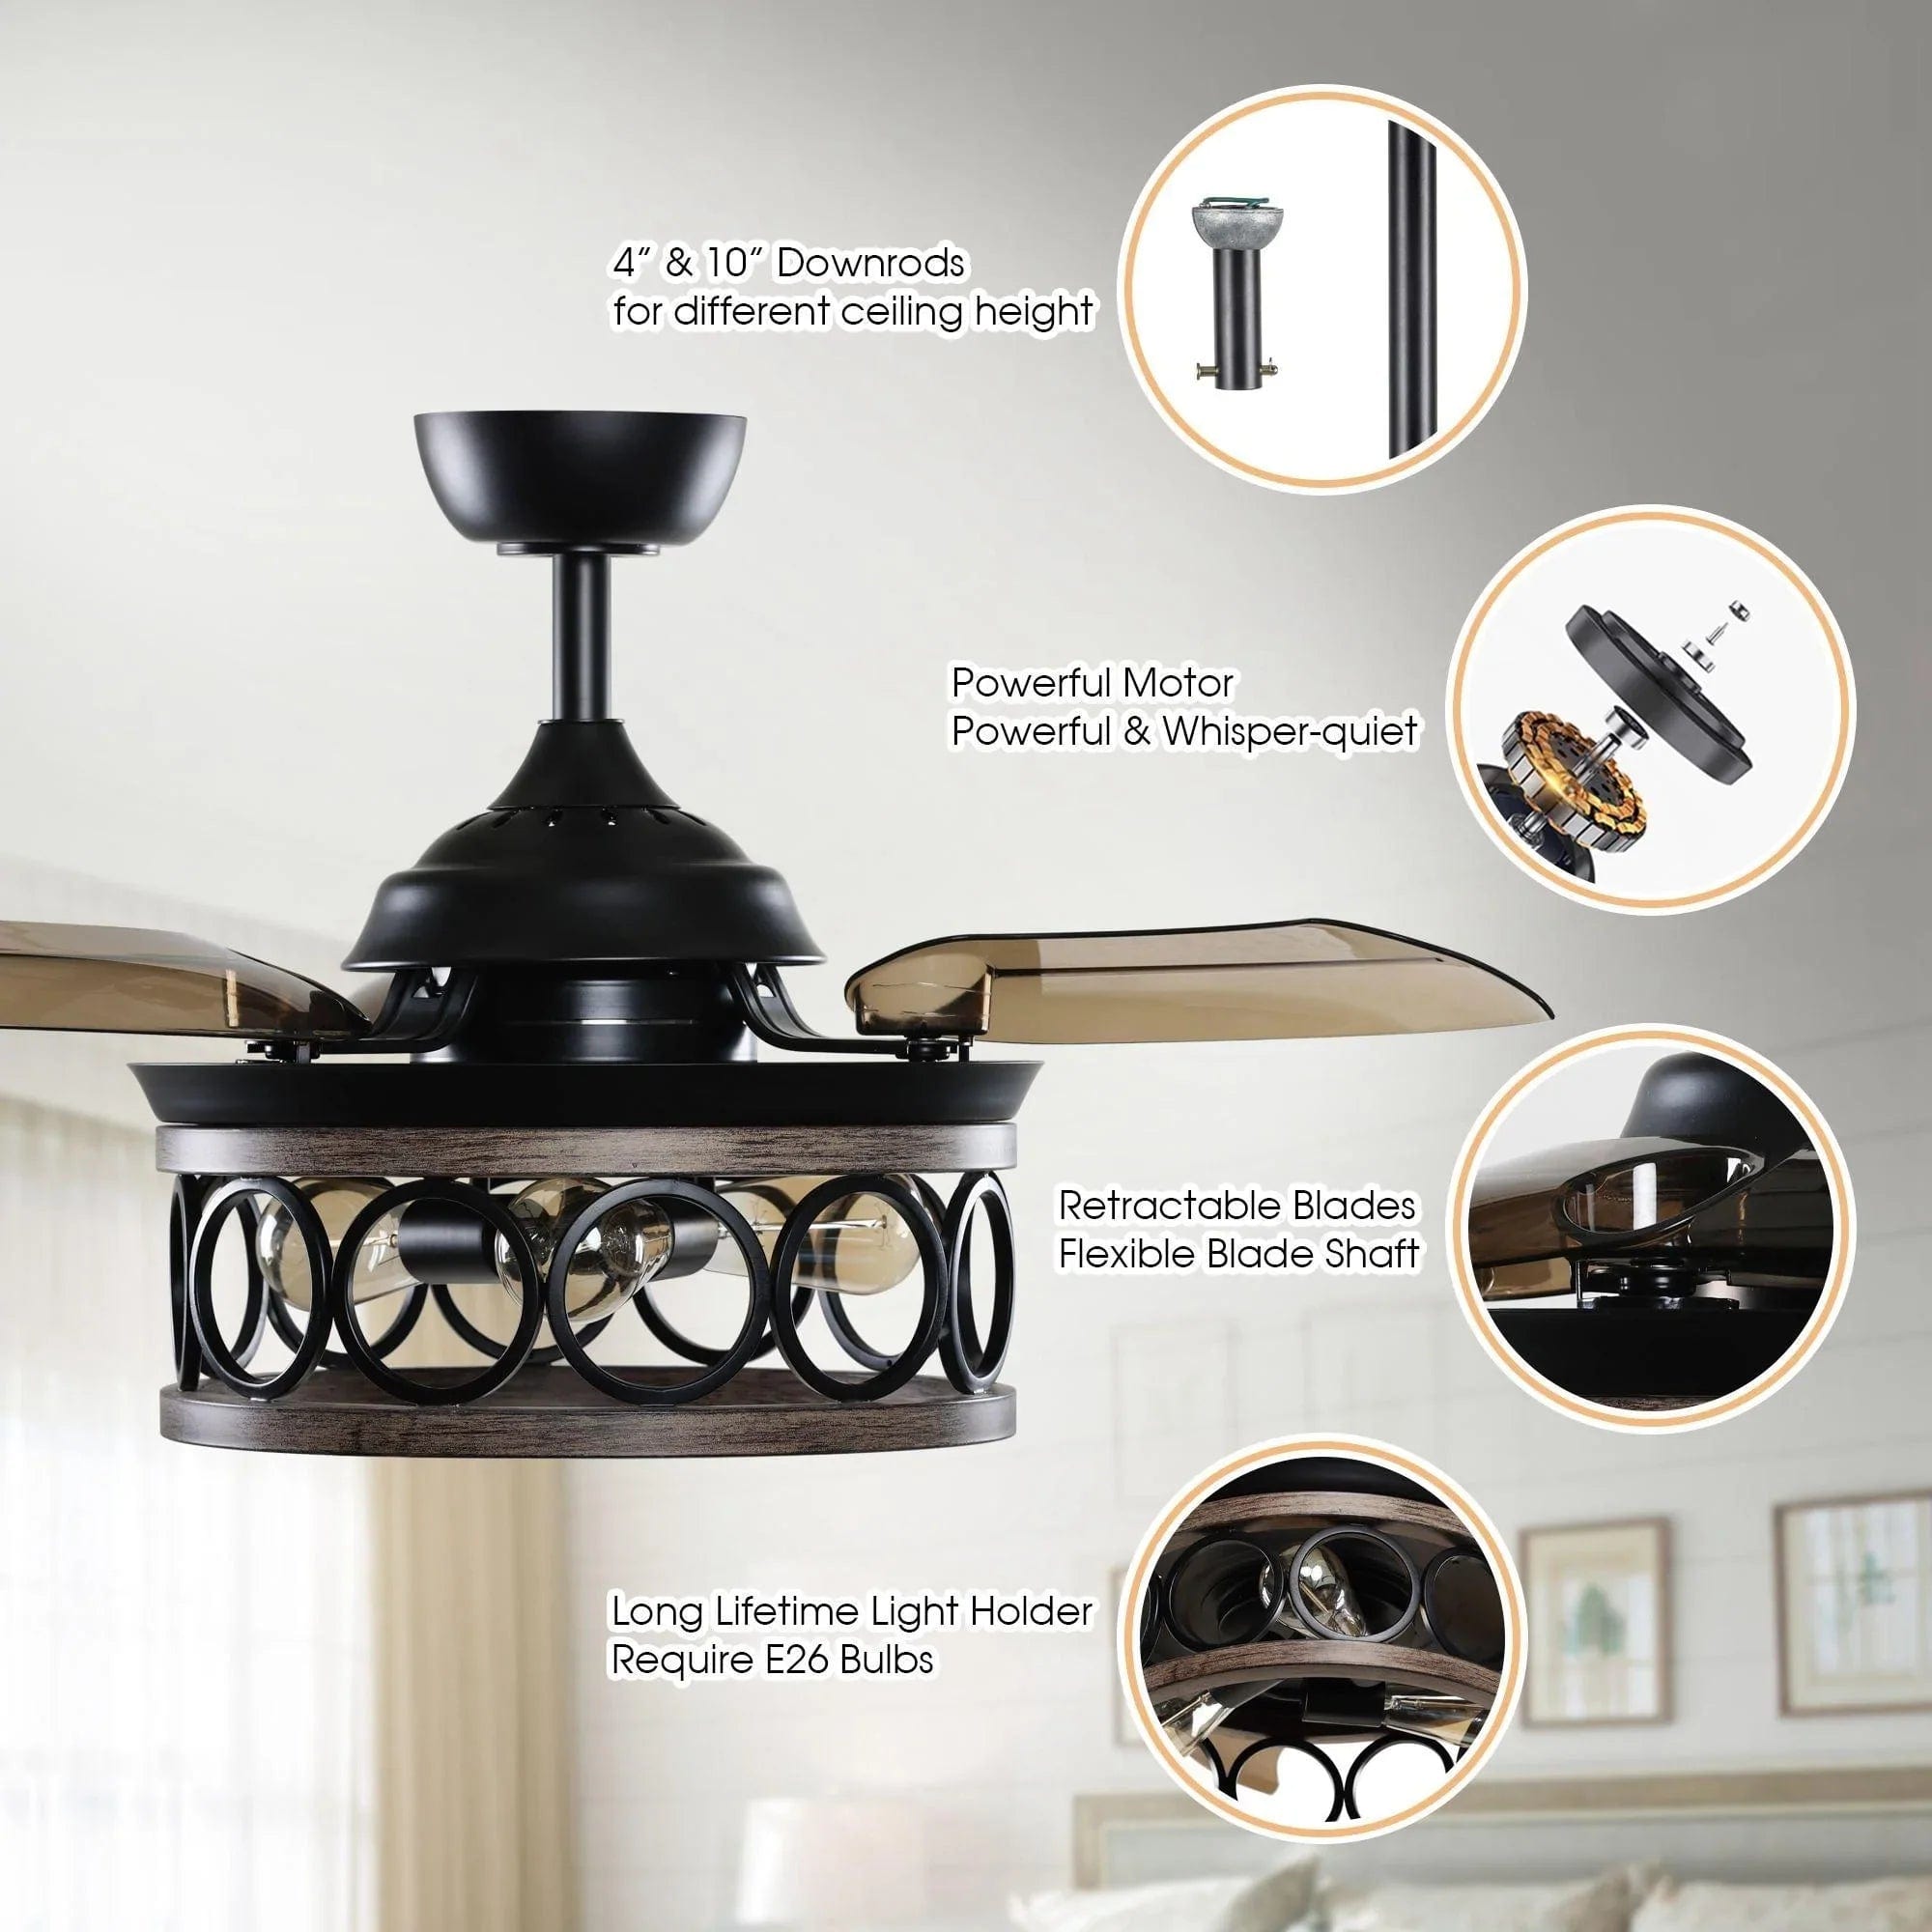 Parrot Uncle Parrot Uncle 36 In. Mirelle Farmhouse Ceiling Fan with Lighting and Remote Control Ceiling Fan F3511110V